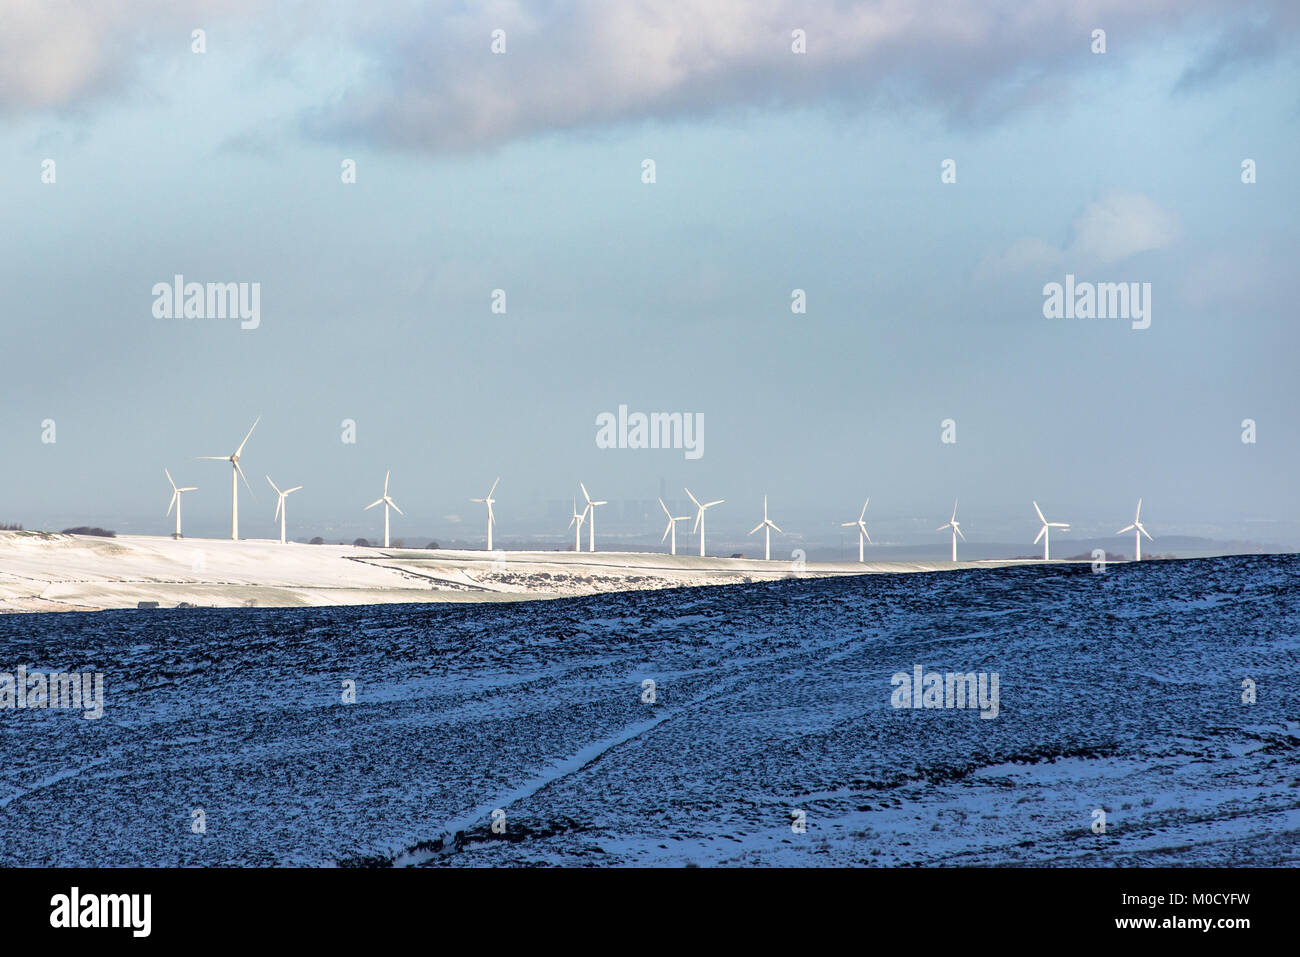 Row of wind turbines producing green energy near Calecotes on the Pennine hills in northern England, UK Stock Photo